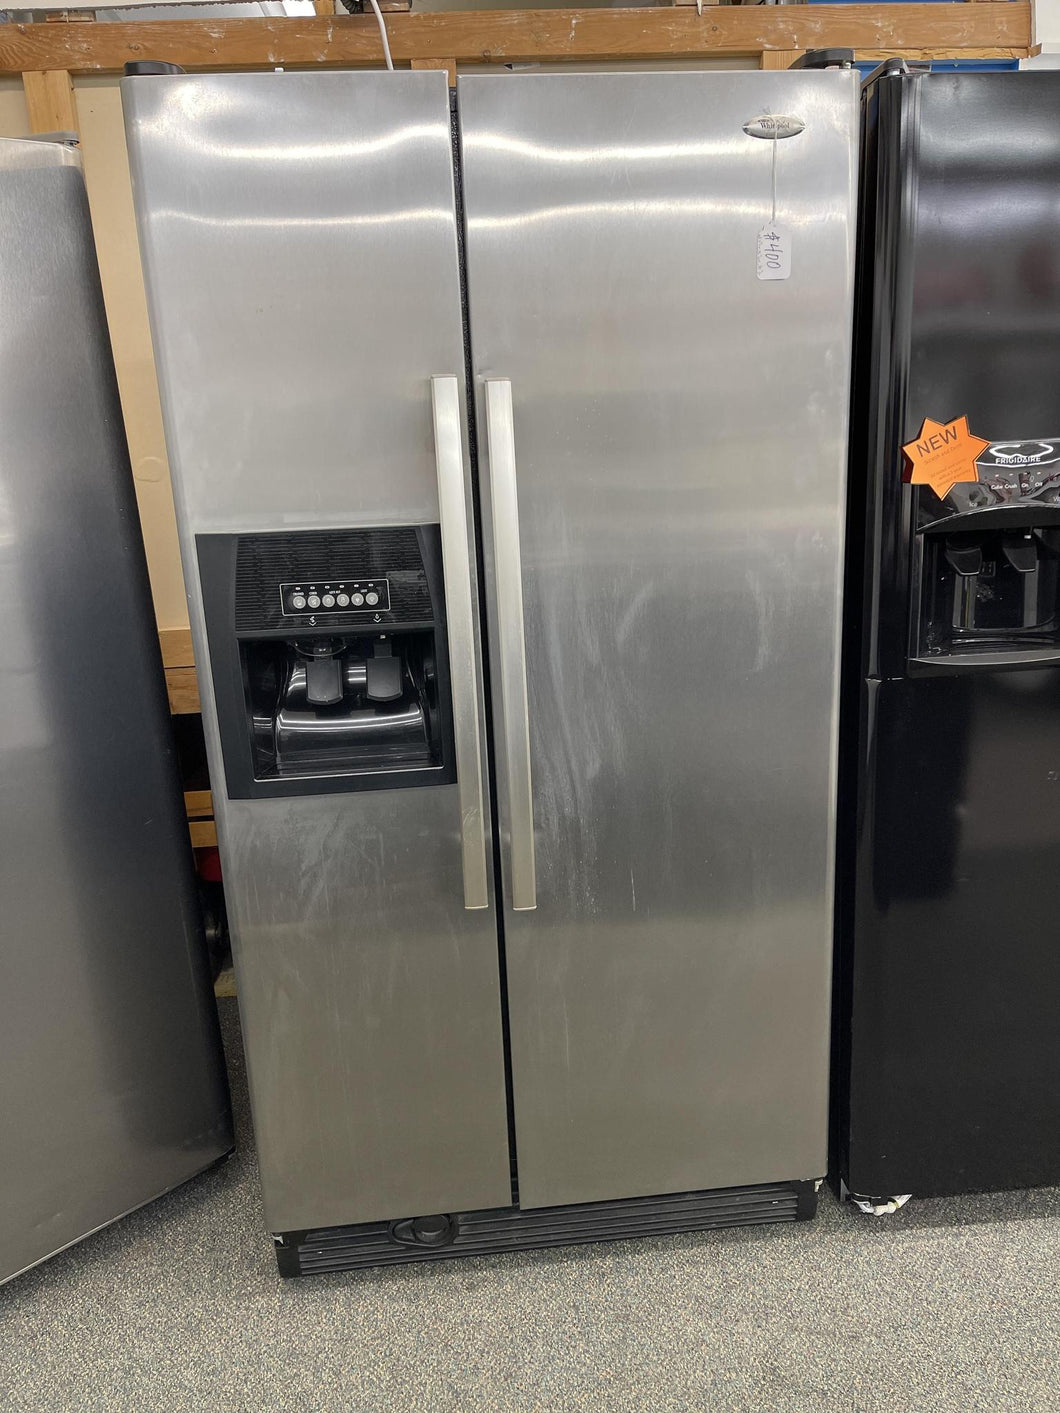 Whirlpool Stainless Side by Side Refrigerator - 7169